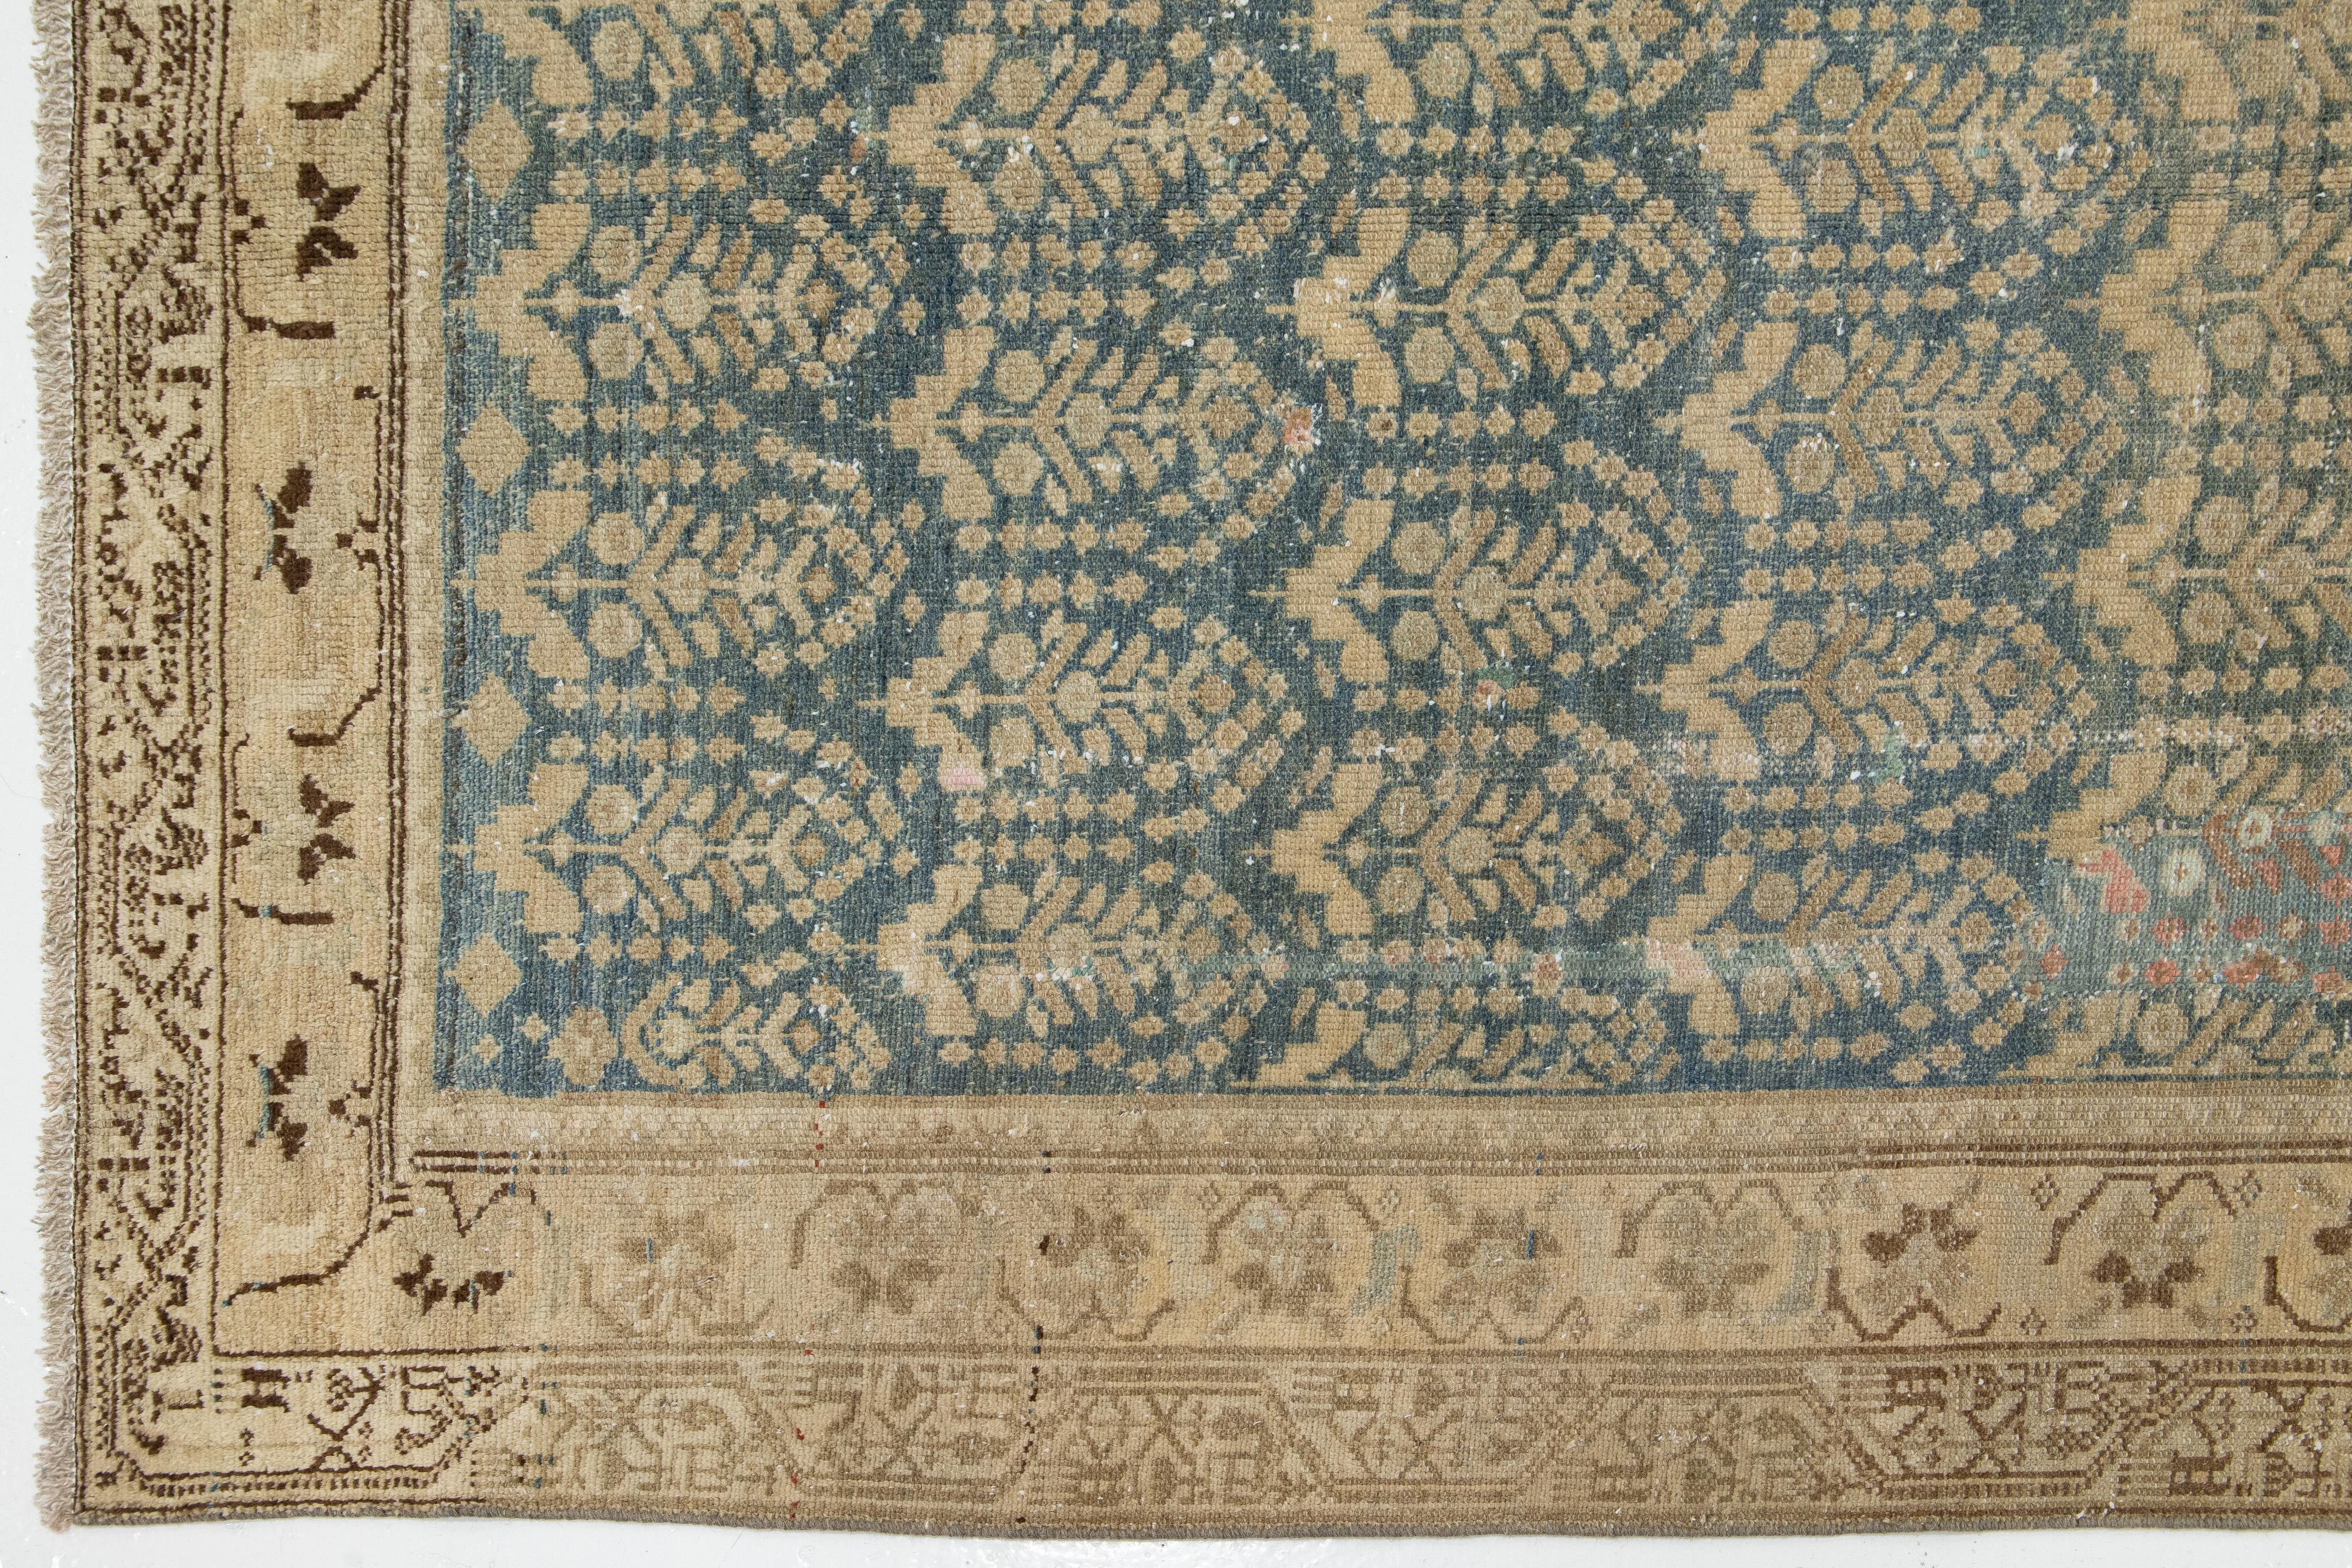 Gallery size Malayer Handmade Persian Antique Wool Rug In Blue For Sale 1